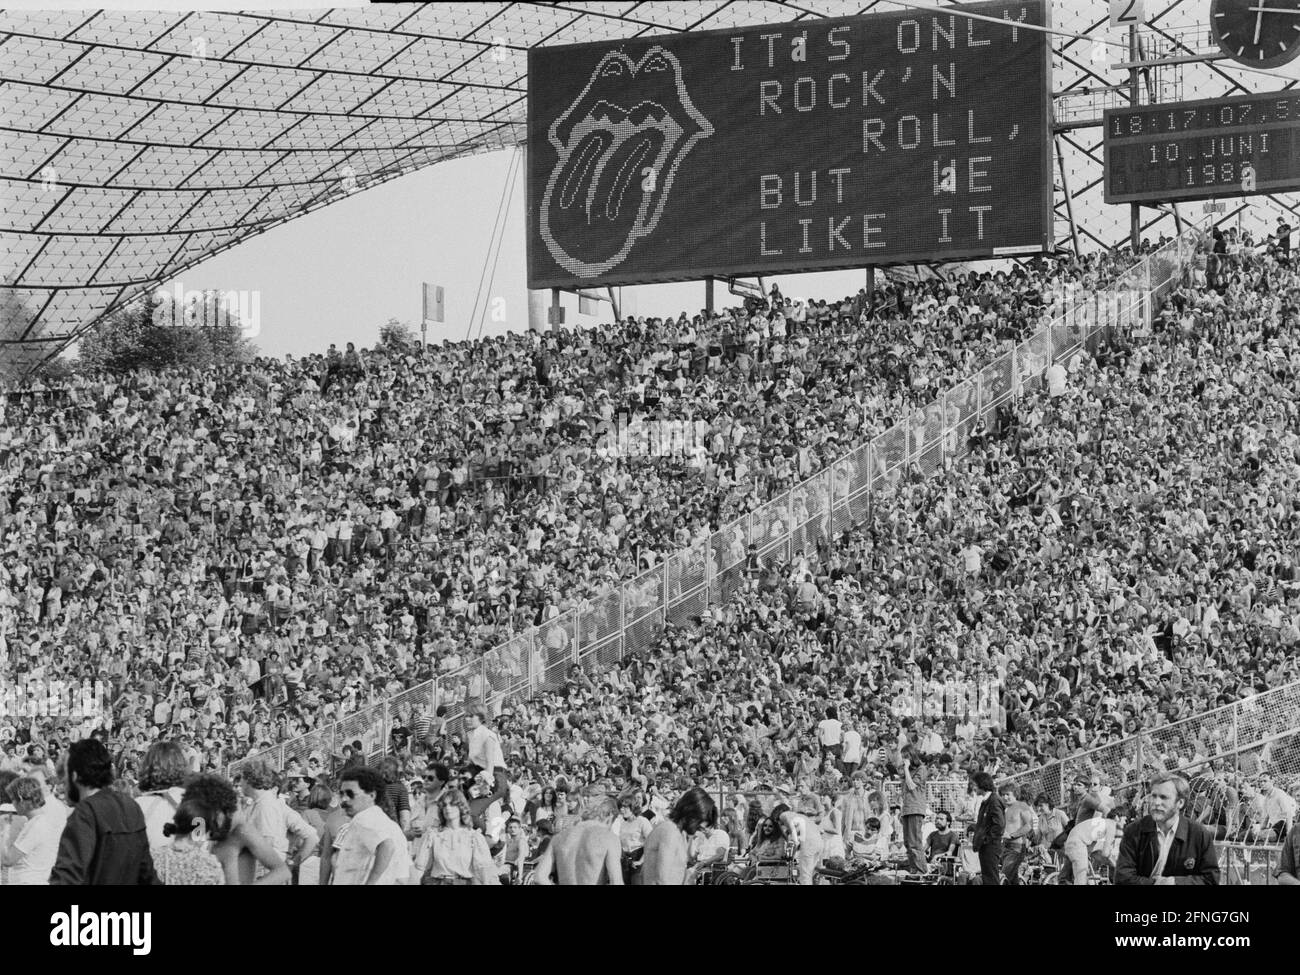 Fans at the Rolling Stones concert in the rows of spectators at the  Olympiastadion in Munich. In the background is a big board with the  inscription ""Its only Rock n Roll, but